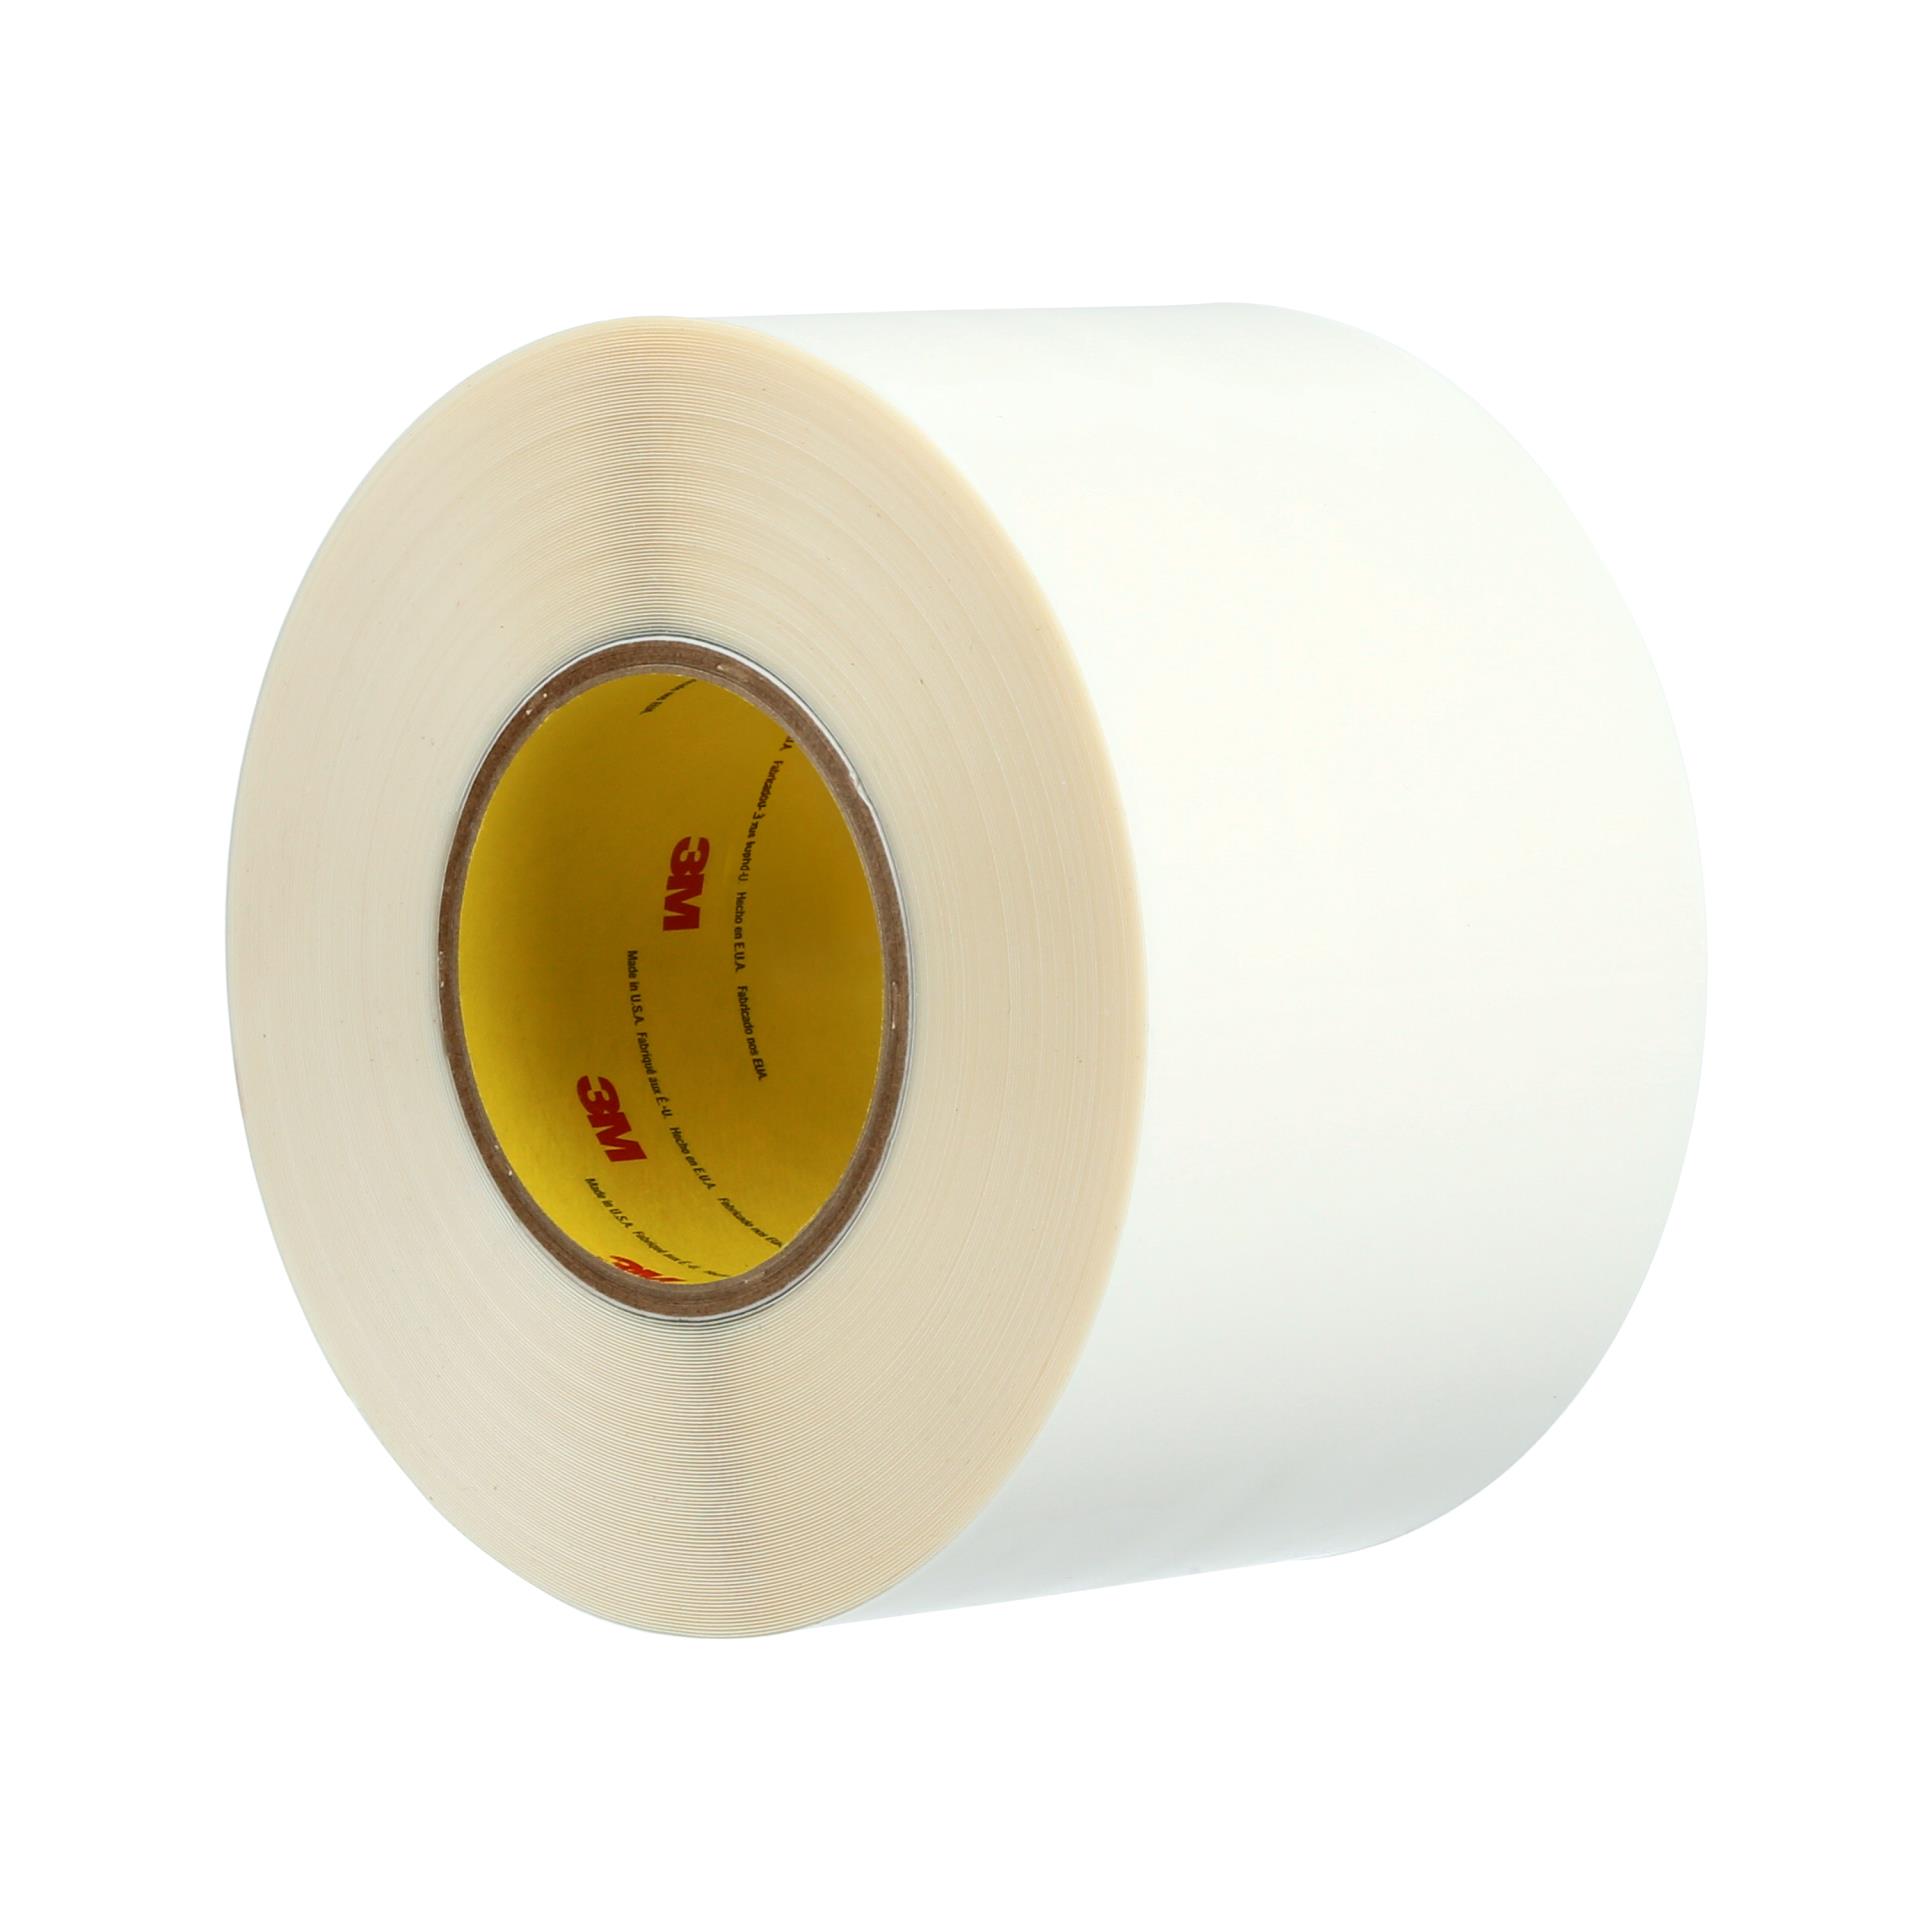 USA Construction Double Sided Tape for Woodworking 108 Feet 25mm